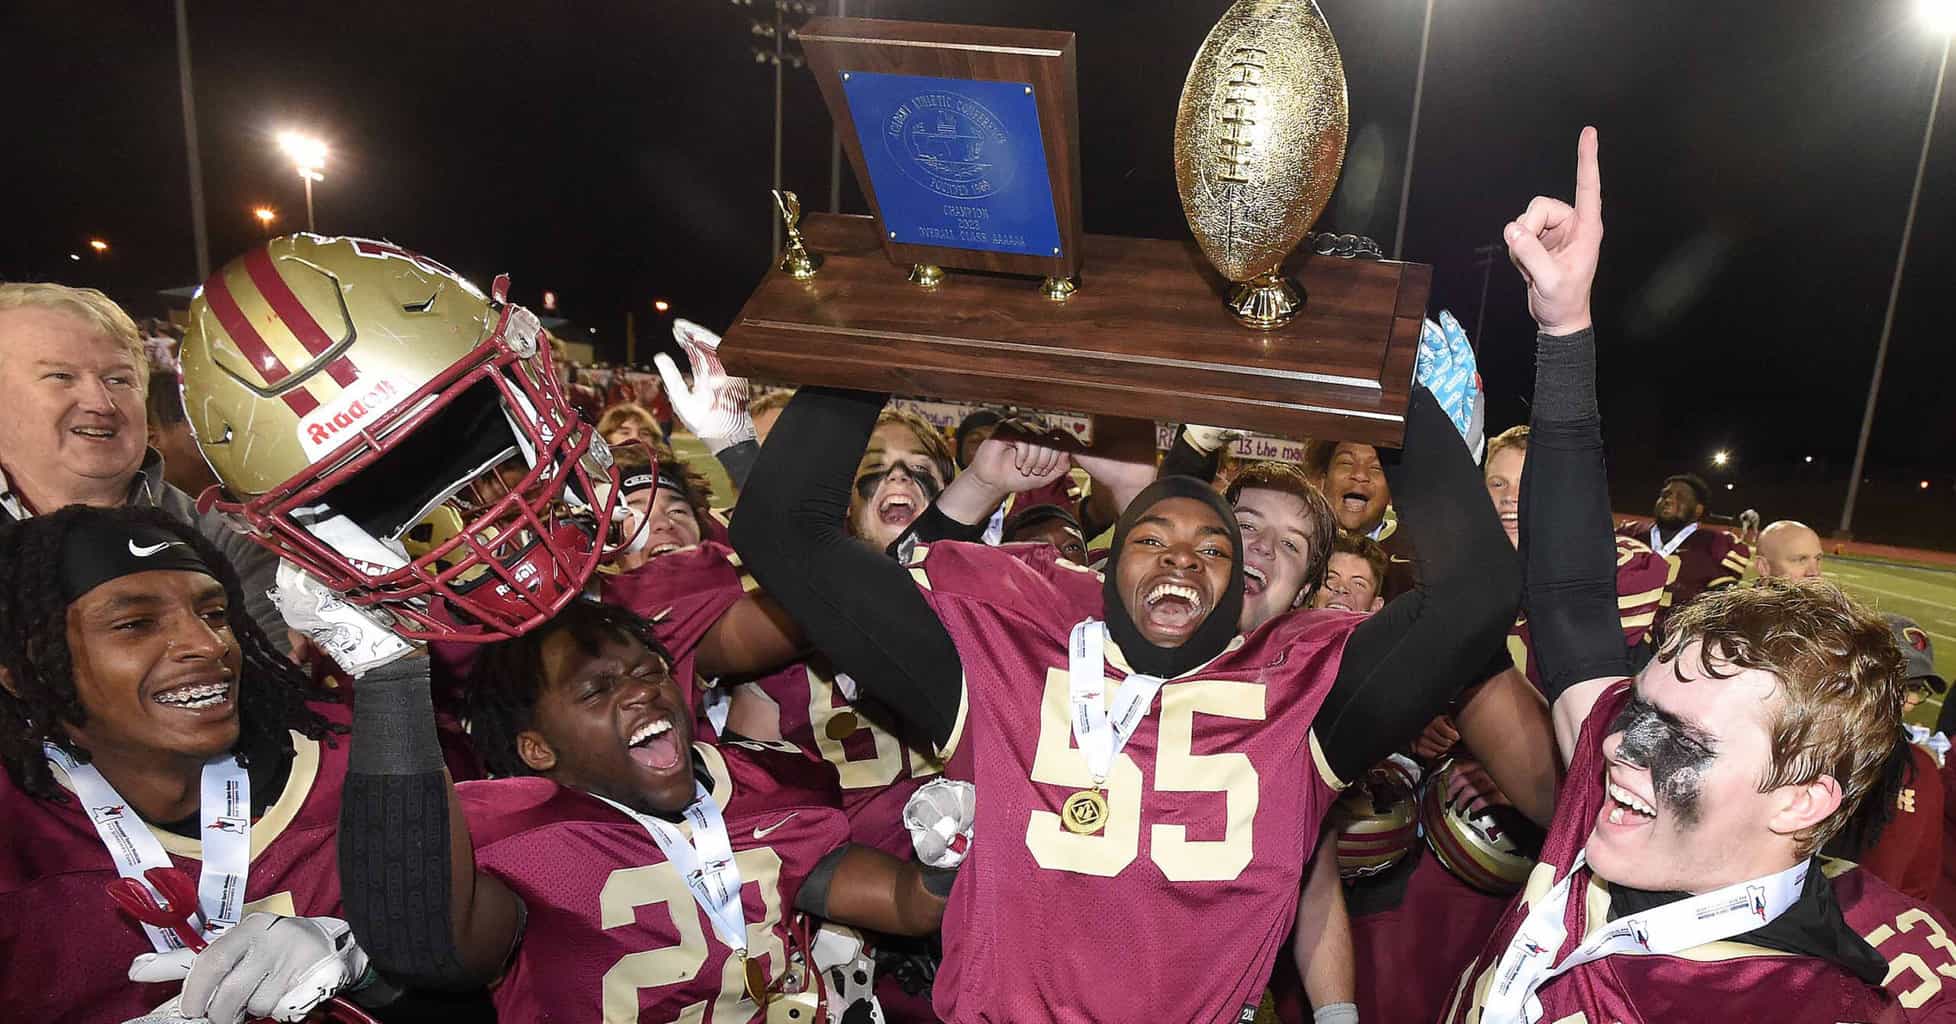 HARTFIELD ACADEMY WINS FIRST STATE FOOTBALL CHAMPIONSHIP IN SCHOOL